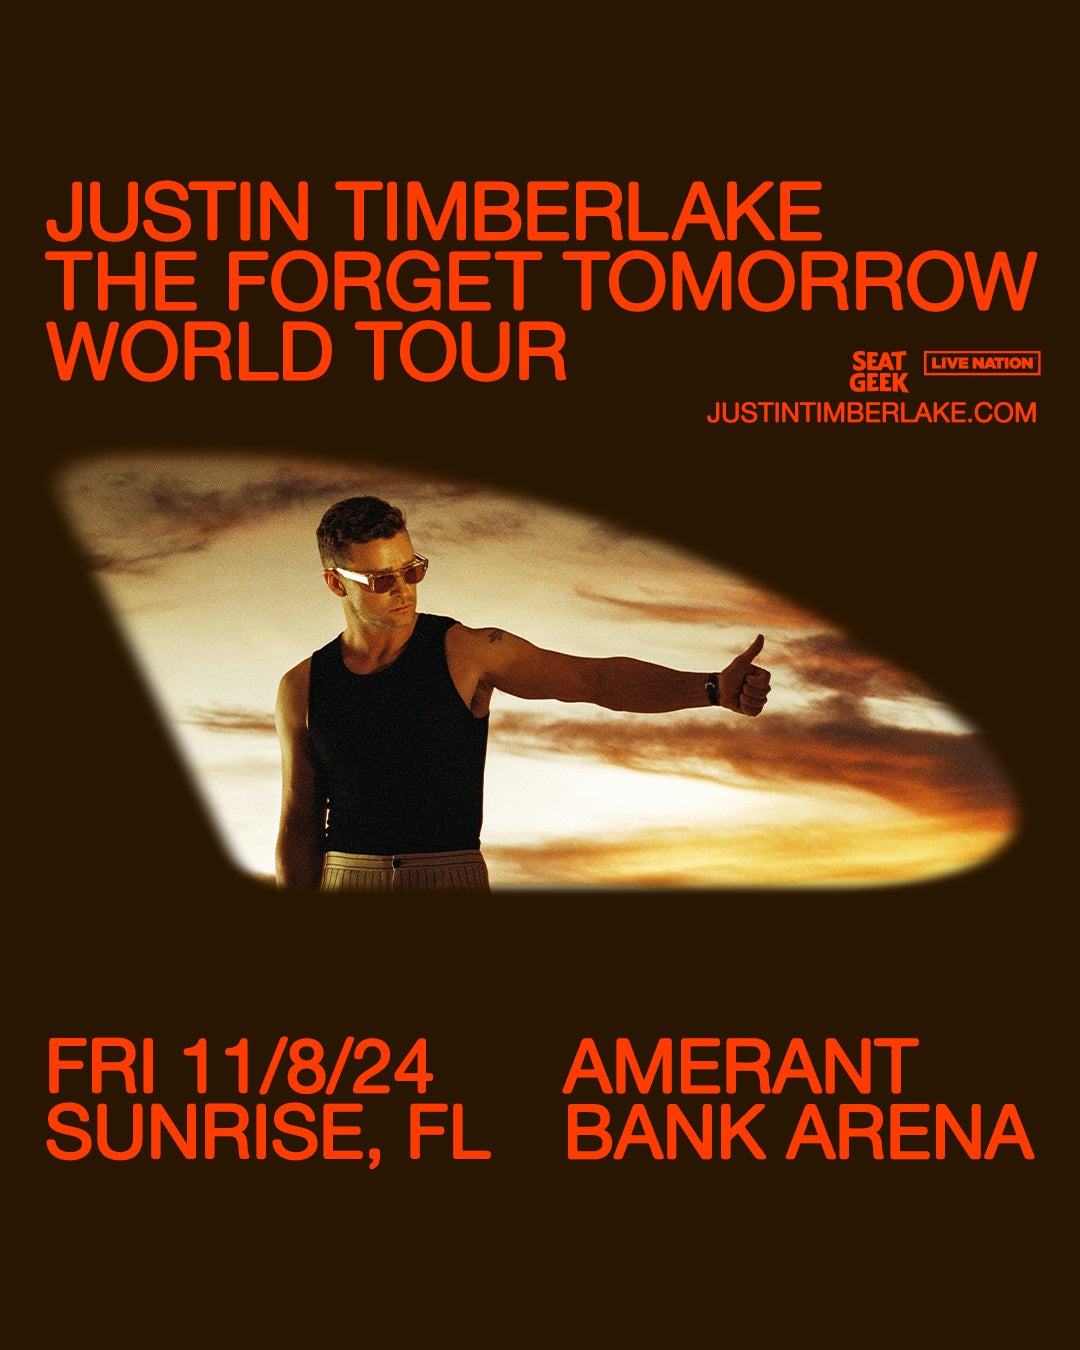 JUSTIN TIMBERLAKE ADDS AMERANT BANK ARENA SHOW ON FRIDAY, NOV. 8 TO SECOND LEG OF THE FORGET TOMORROW WORLD TOUR